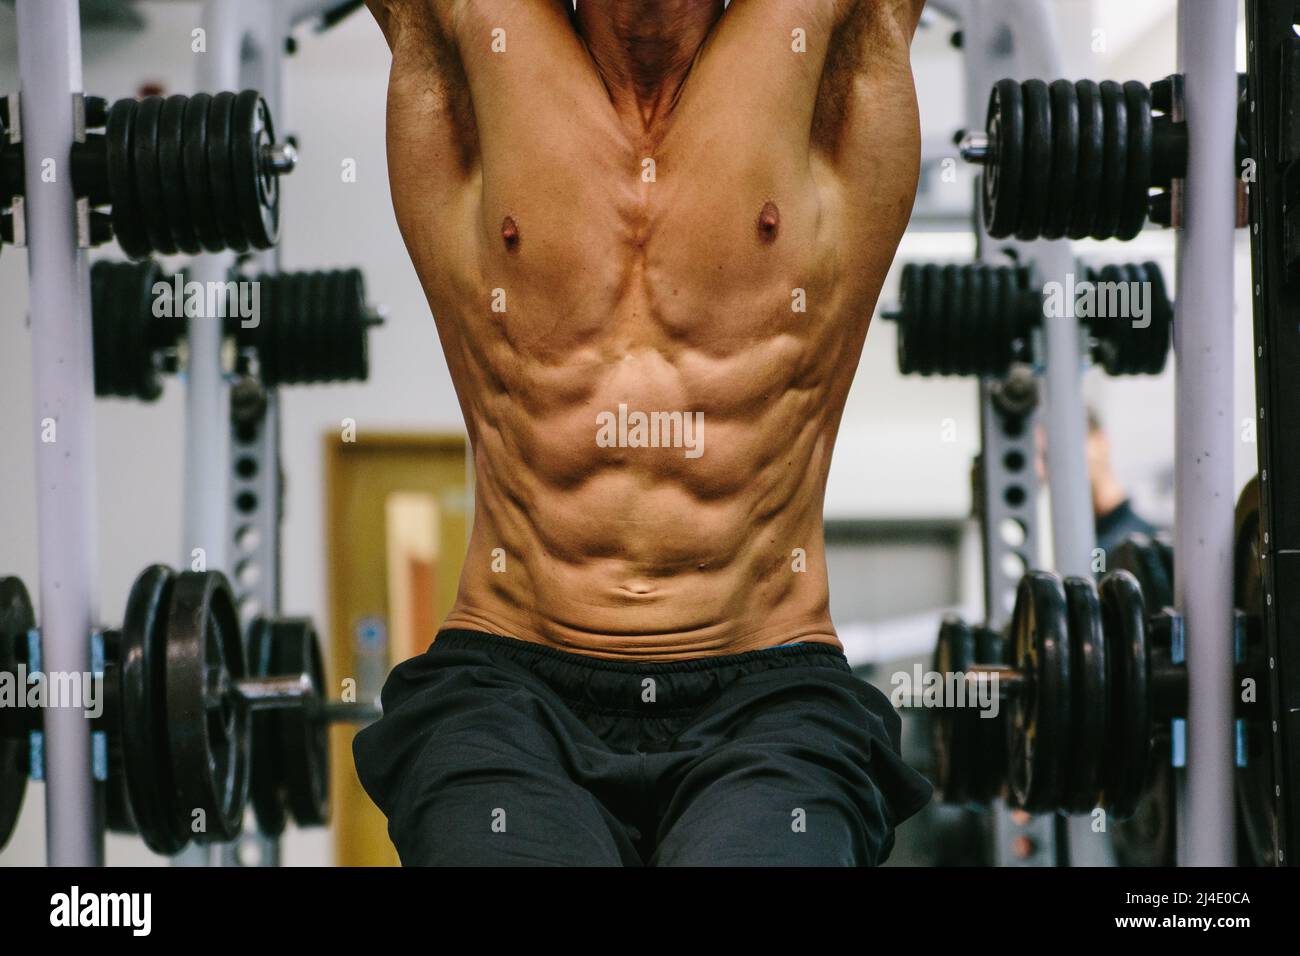 City Of London, London, UK - September 10, 2014: A man works out in a generic gym. He has a well-defined body. Stock Photo